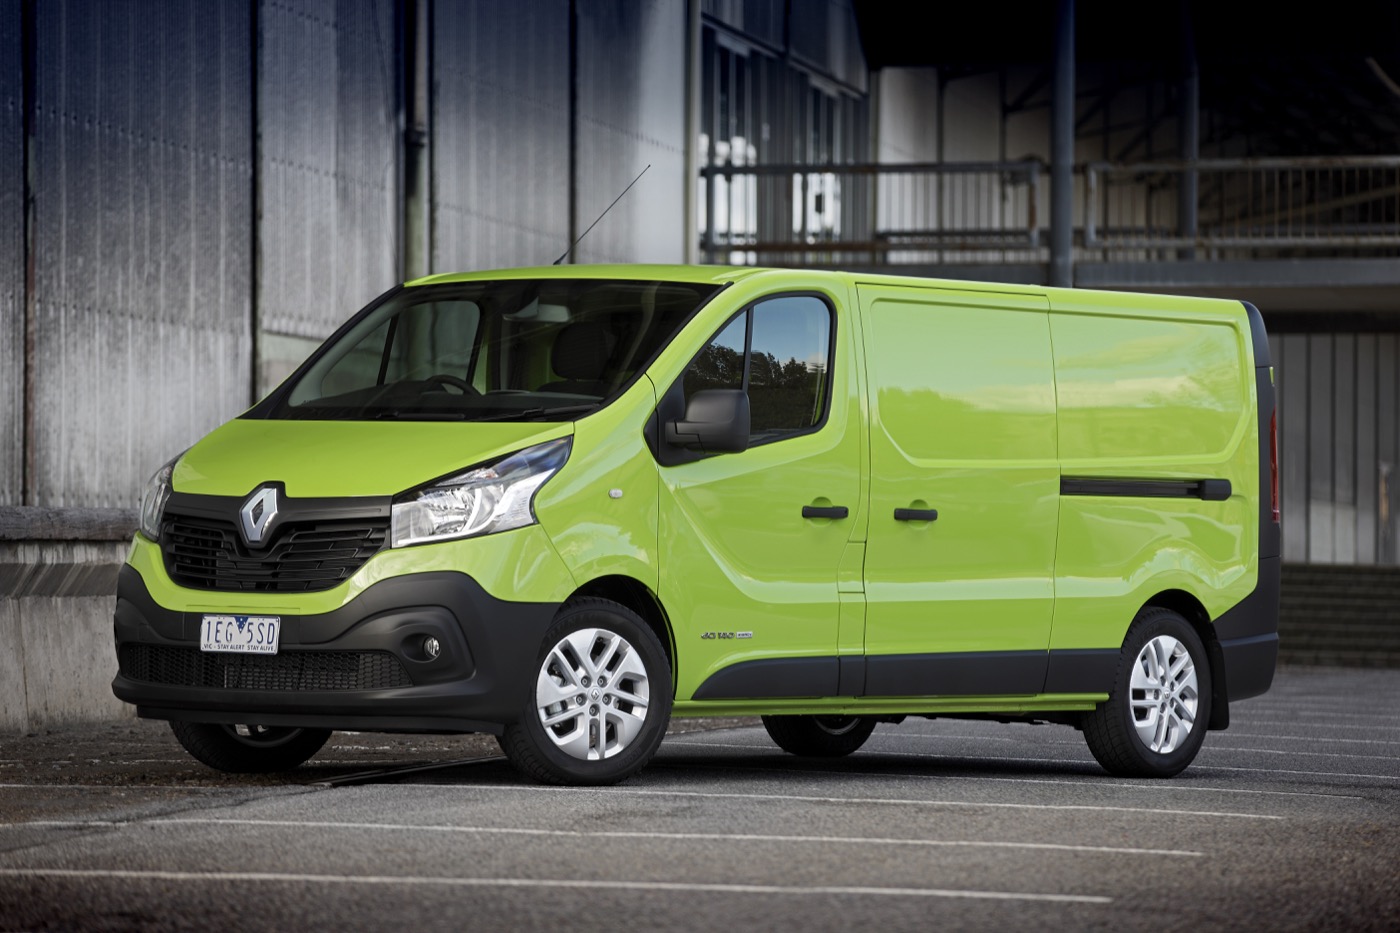 Review - 2015 Renault Trafic Review and 